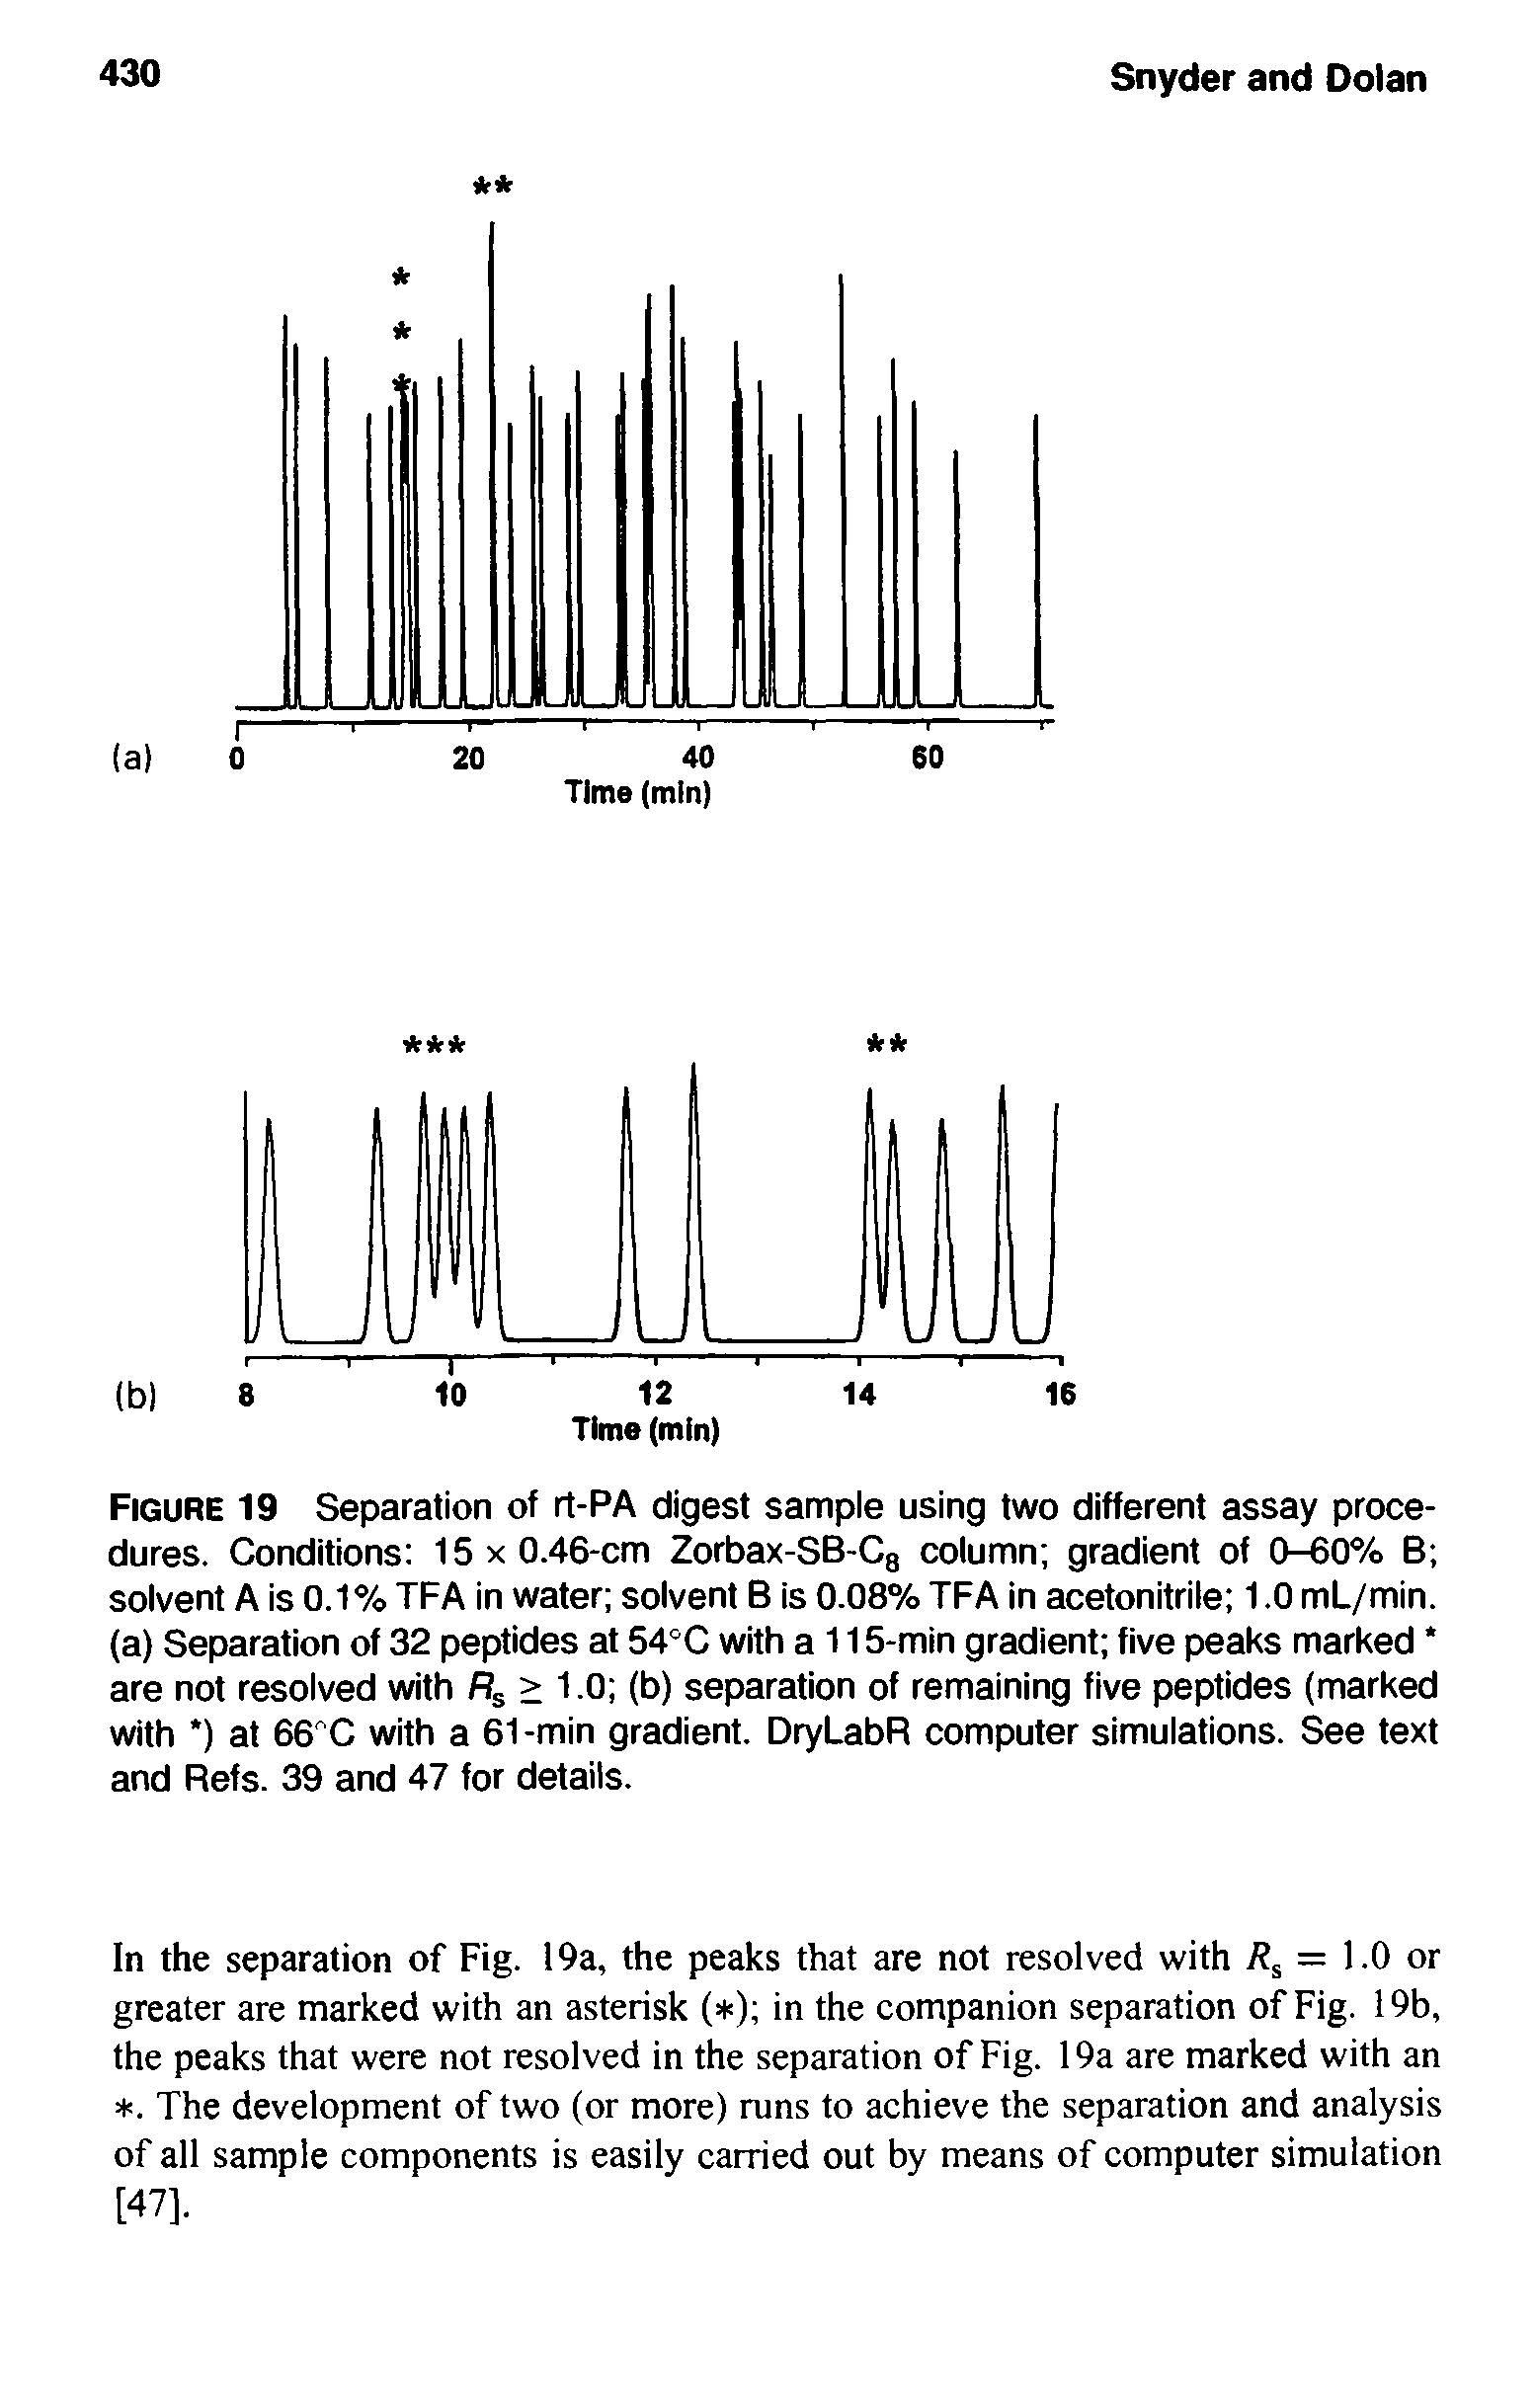 Figure 19 Separation of rt-PA digest sample using two different assay procedures. Conditions 15x0.46-cm Zorbax-SB-Cg column gradient of 0-60% B solvent A is 0.1% TFA in water solvent B is 0.08% TFA in acetonitrile 1.0 mL/min. (a) Separation of 32 peptides at 54°C with a 115-min gradient five peaks marked are not resolved with > 10 (b) separation of remaining five peptides (marked with ) at 66"C with a 61-min gradient. DryLabR computer simulations. See text and Refs. 39 and 47 for details.